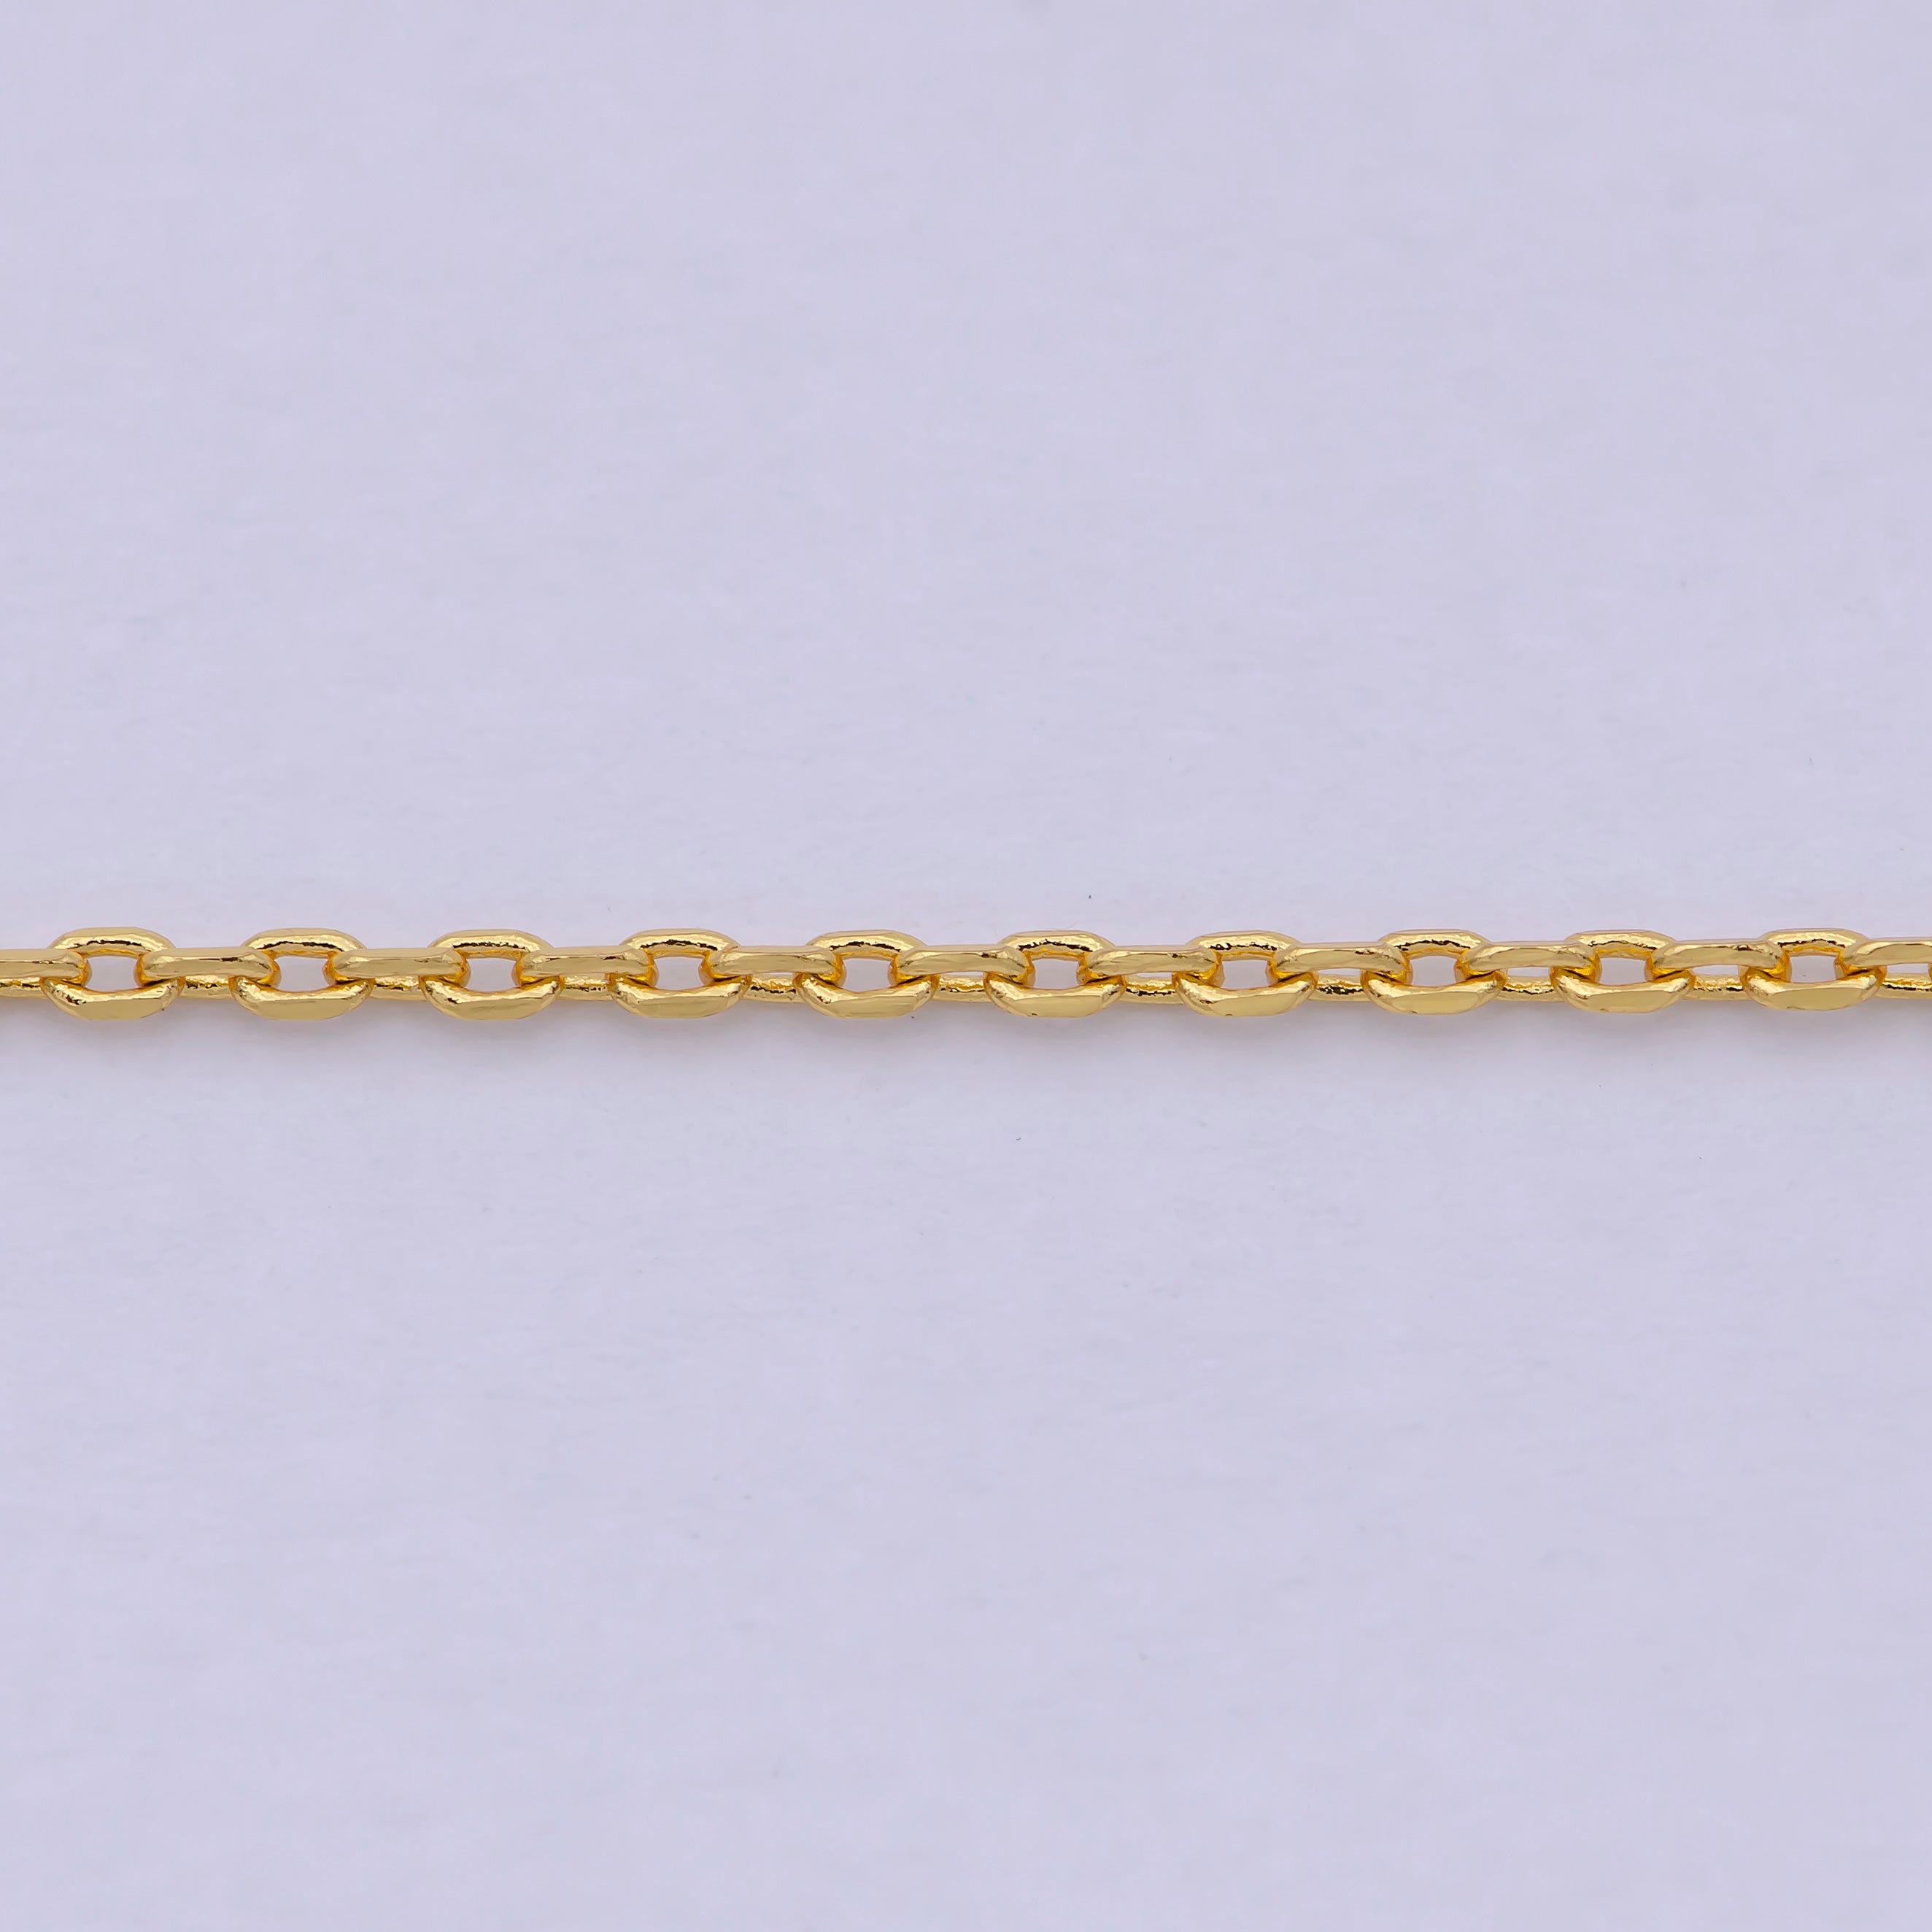 Dainty 24K Gold Filled Cable Chain Necklace 17.5 inch for Woman Jewelry WA-806 - DLUXCA